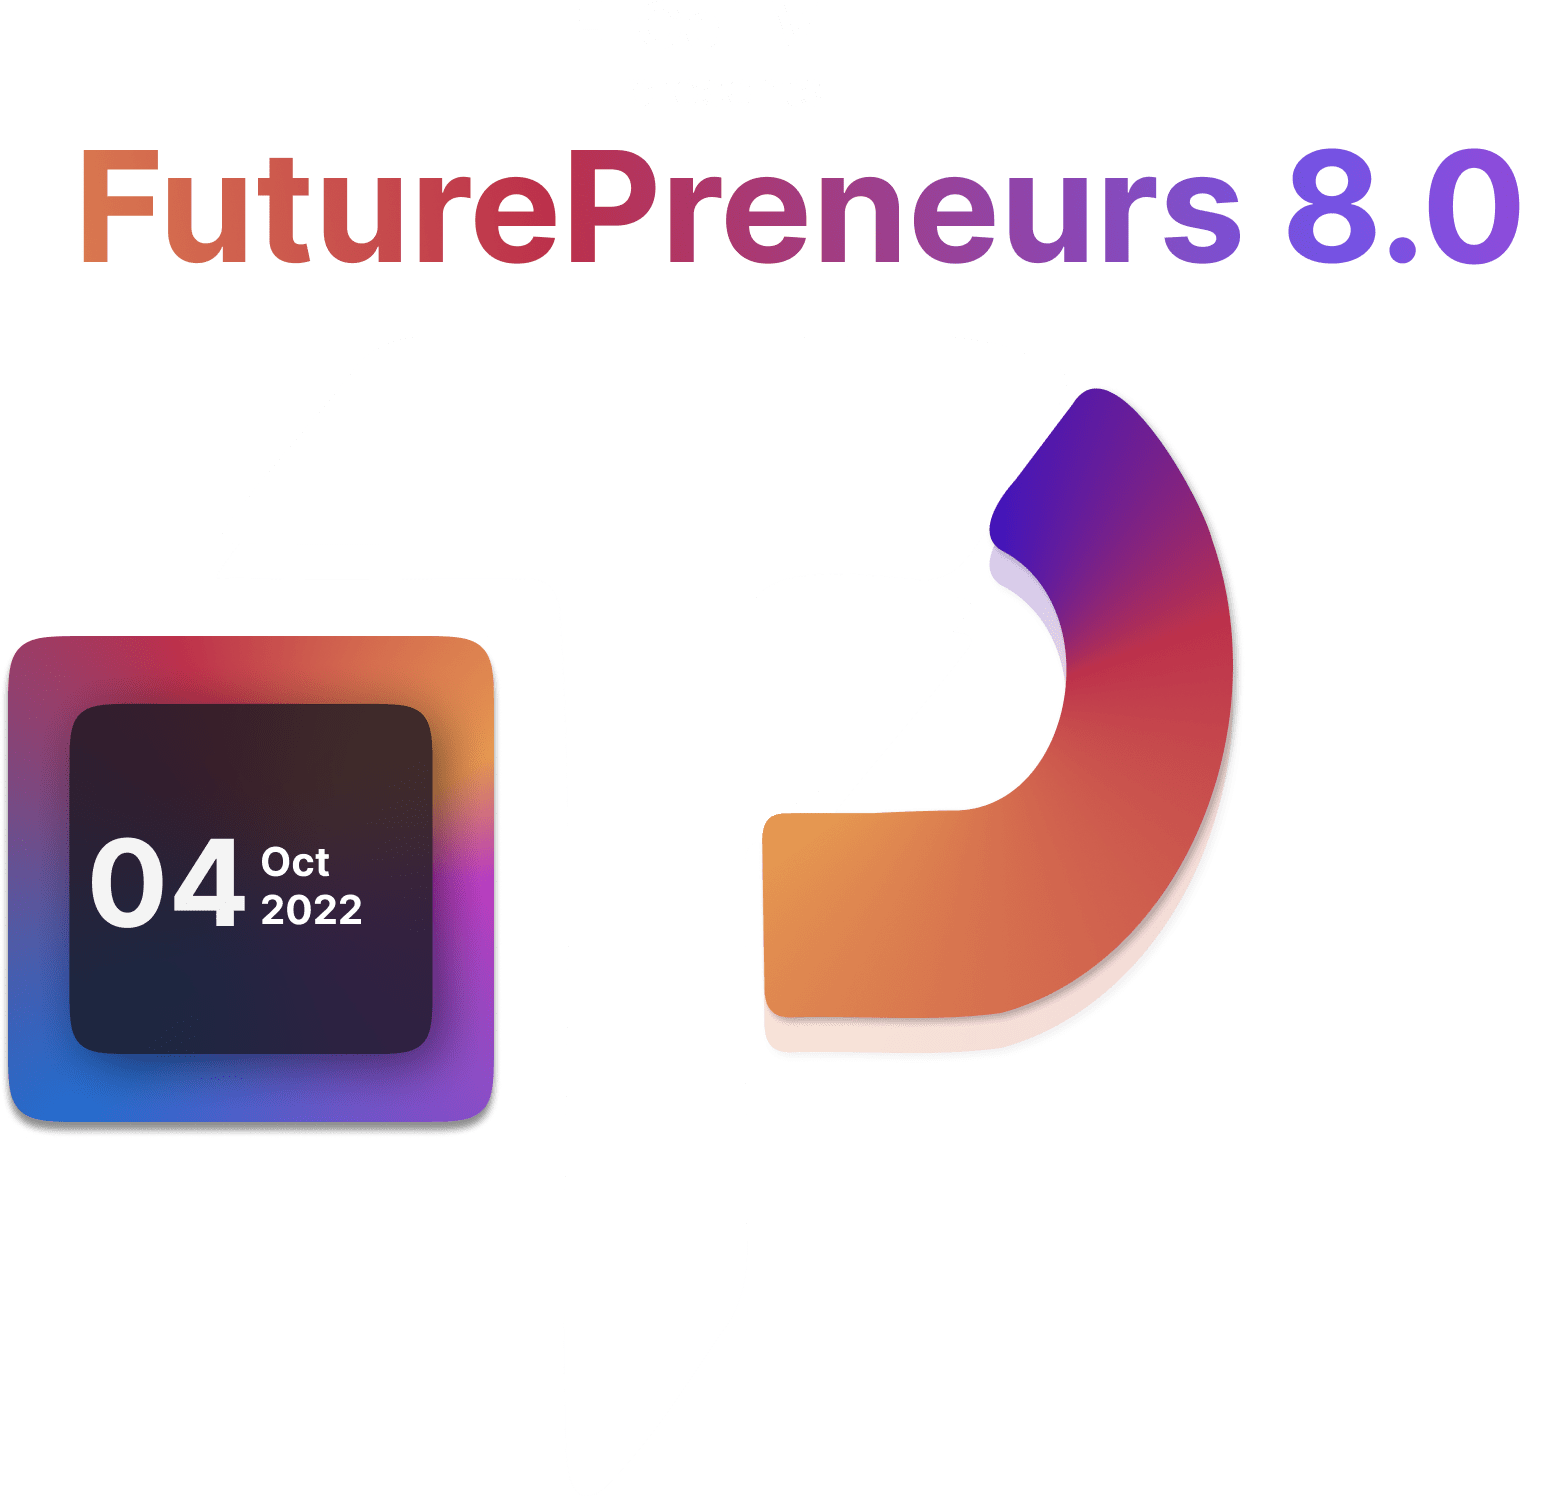 Entrepreneurship Cell - VIT - E-Cell VIT is back with yet another